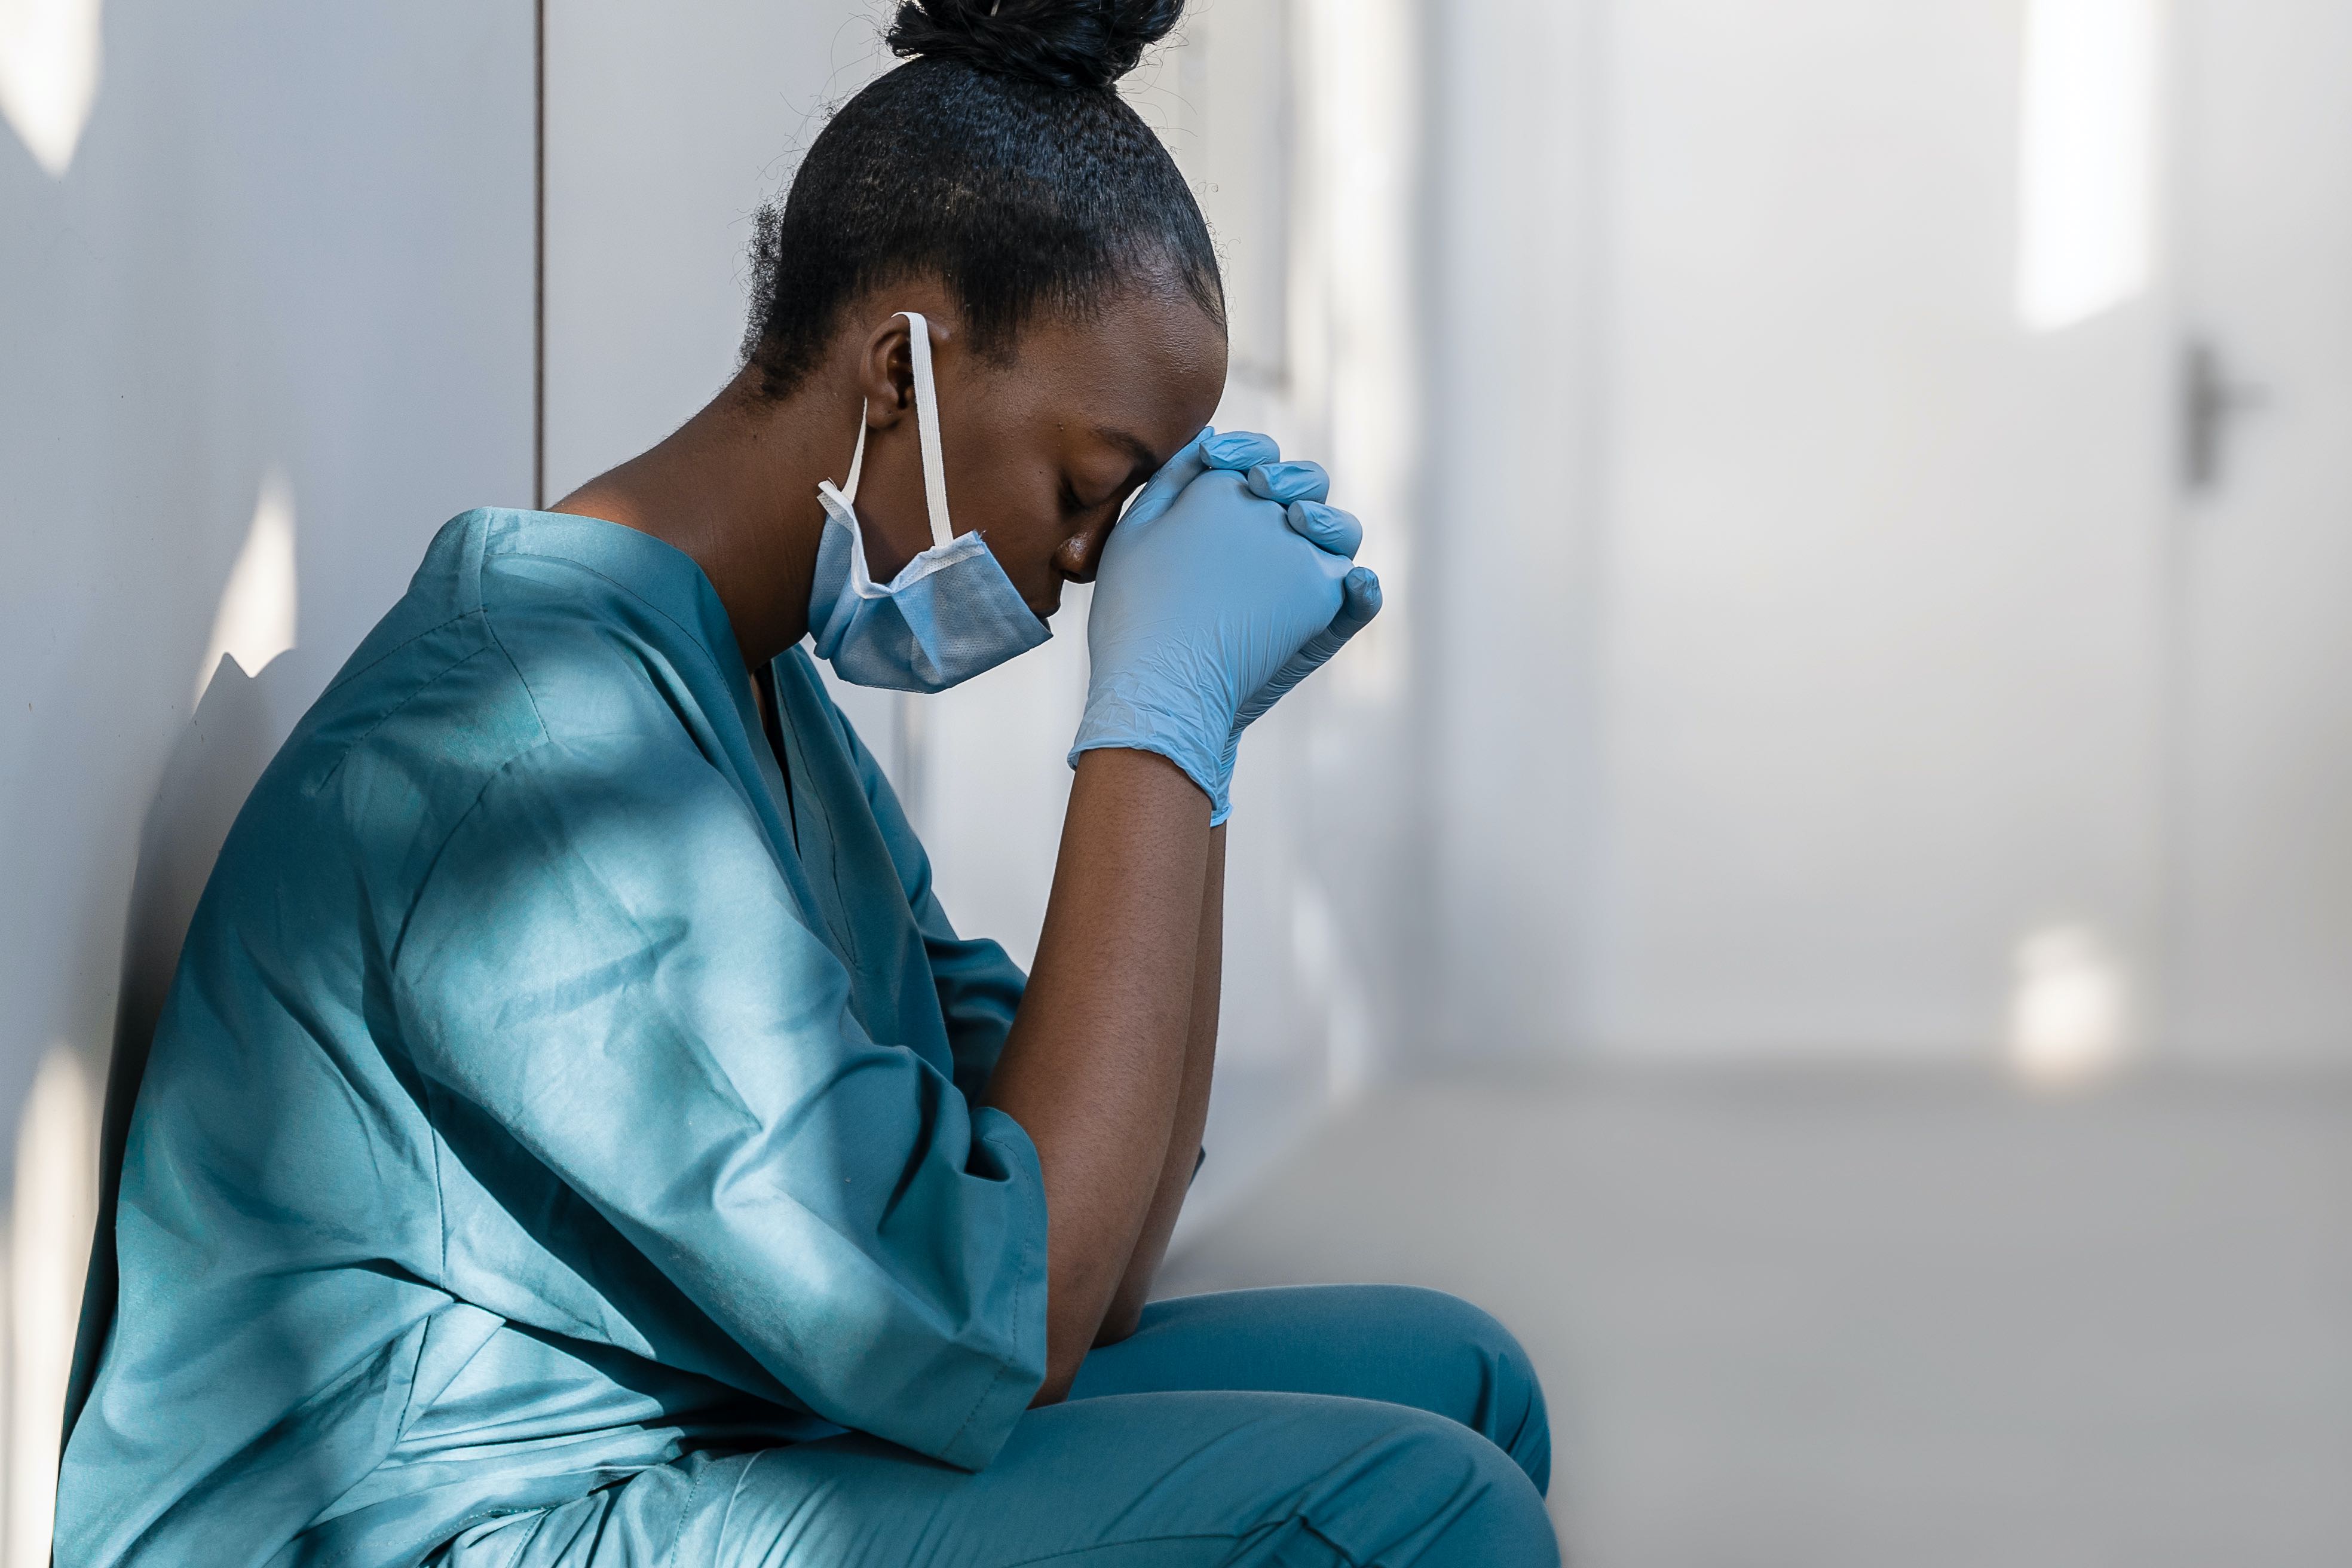 A woman in a hospital uniform and a mask sits against a wall. Her eyes are closed and she appears exhausted.